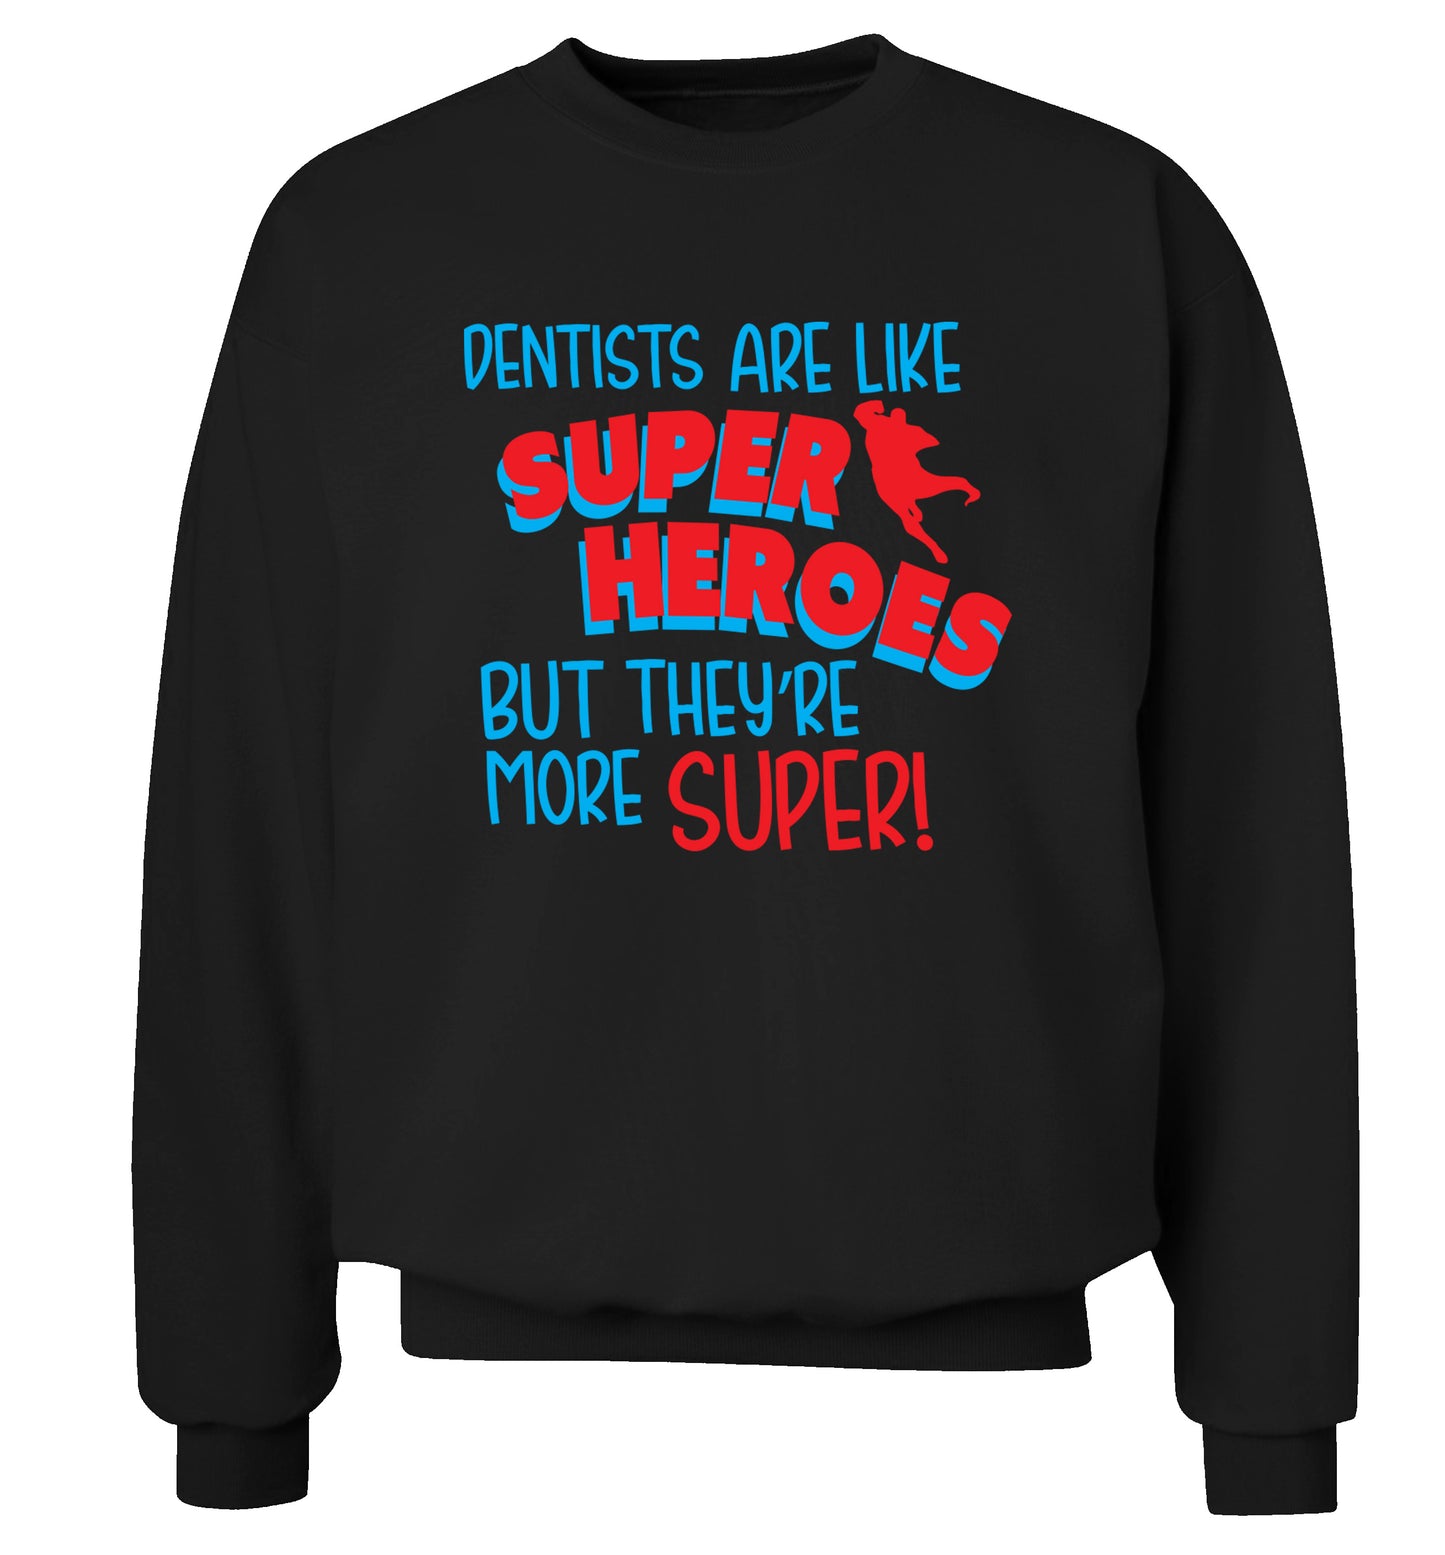 Dentists are like superheros but they're more super Adult's unisex black Sweater 2XL